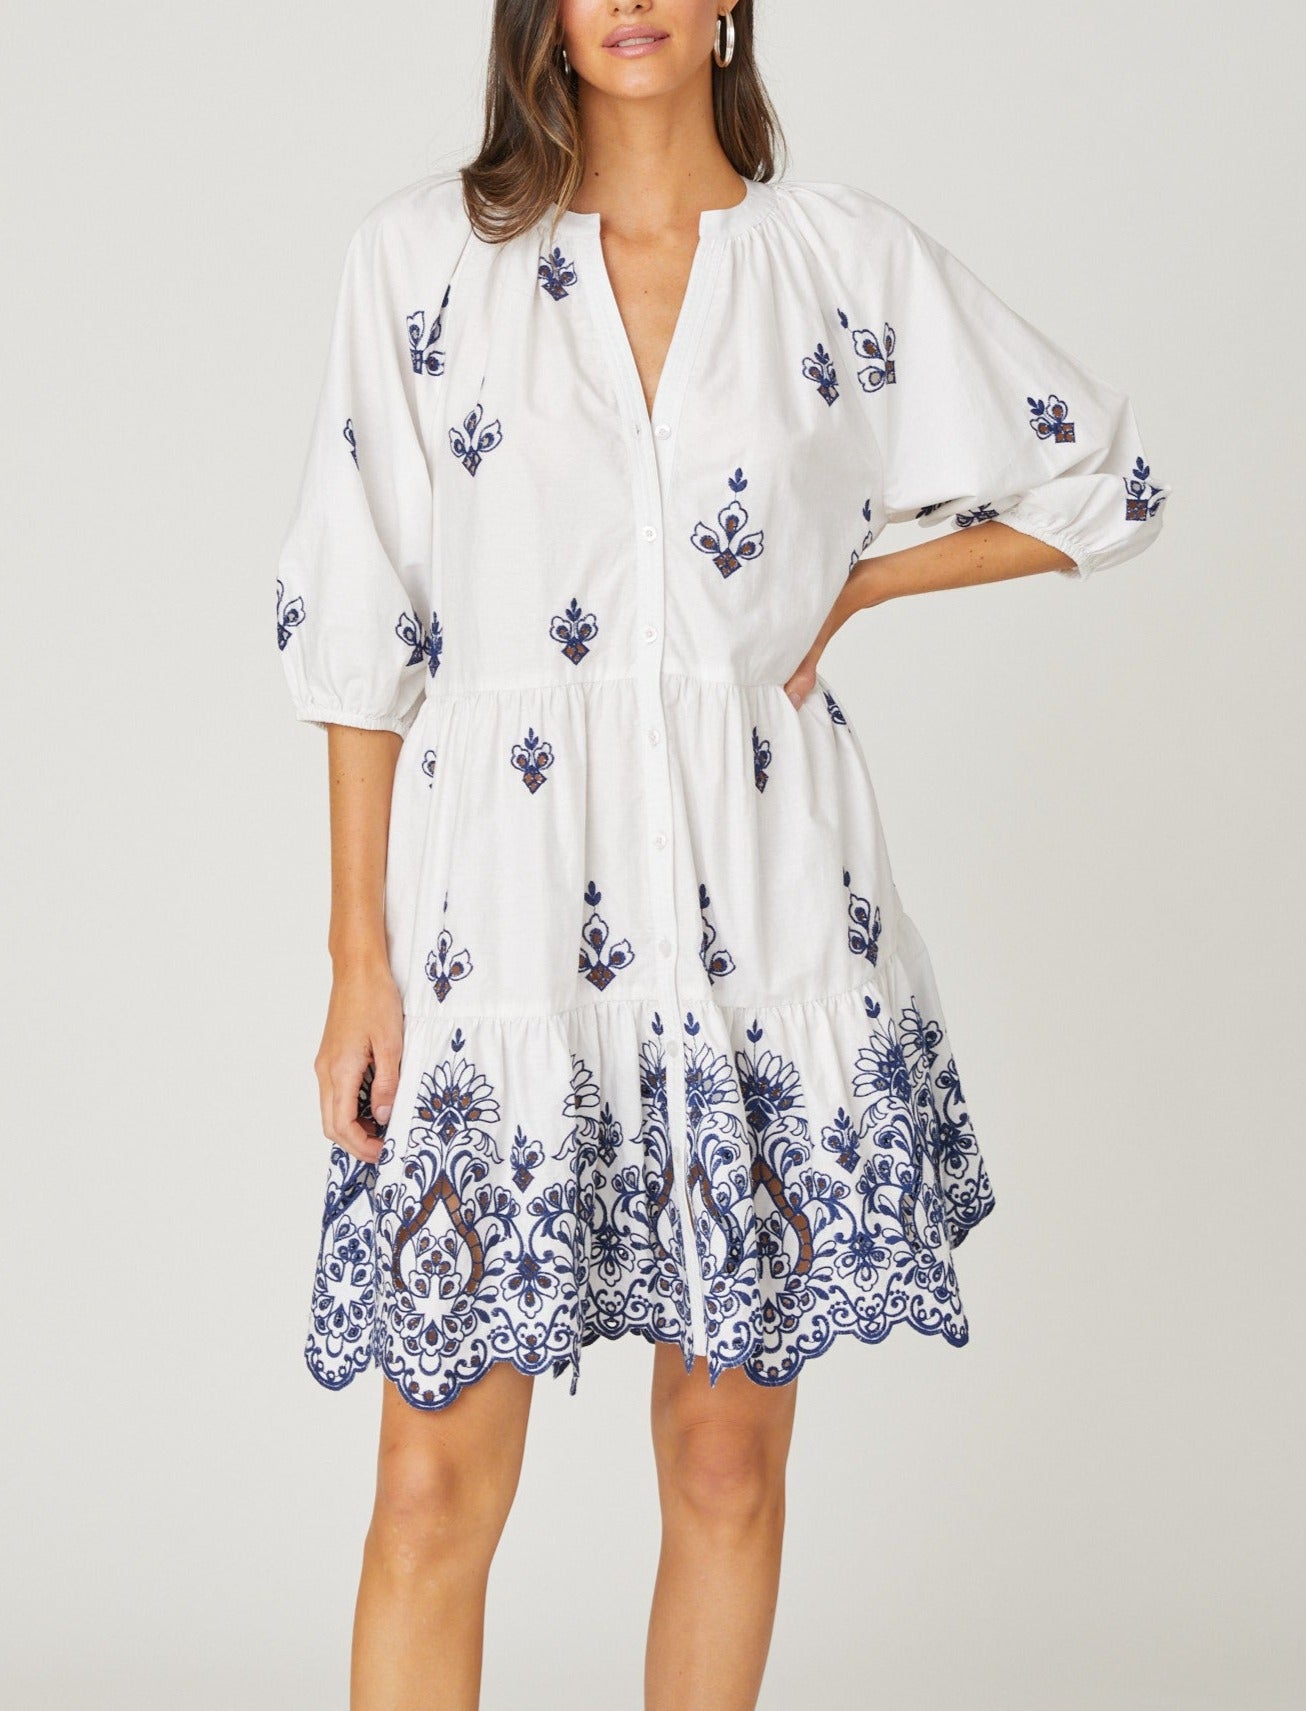 The Embroidered Tunic in Optic Navy